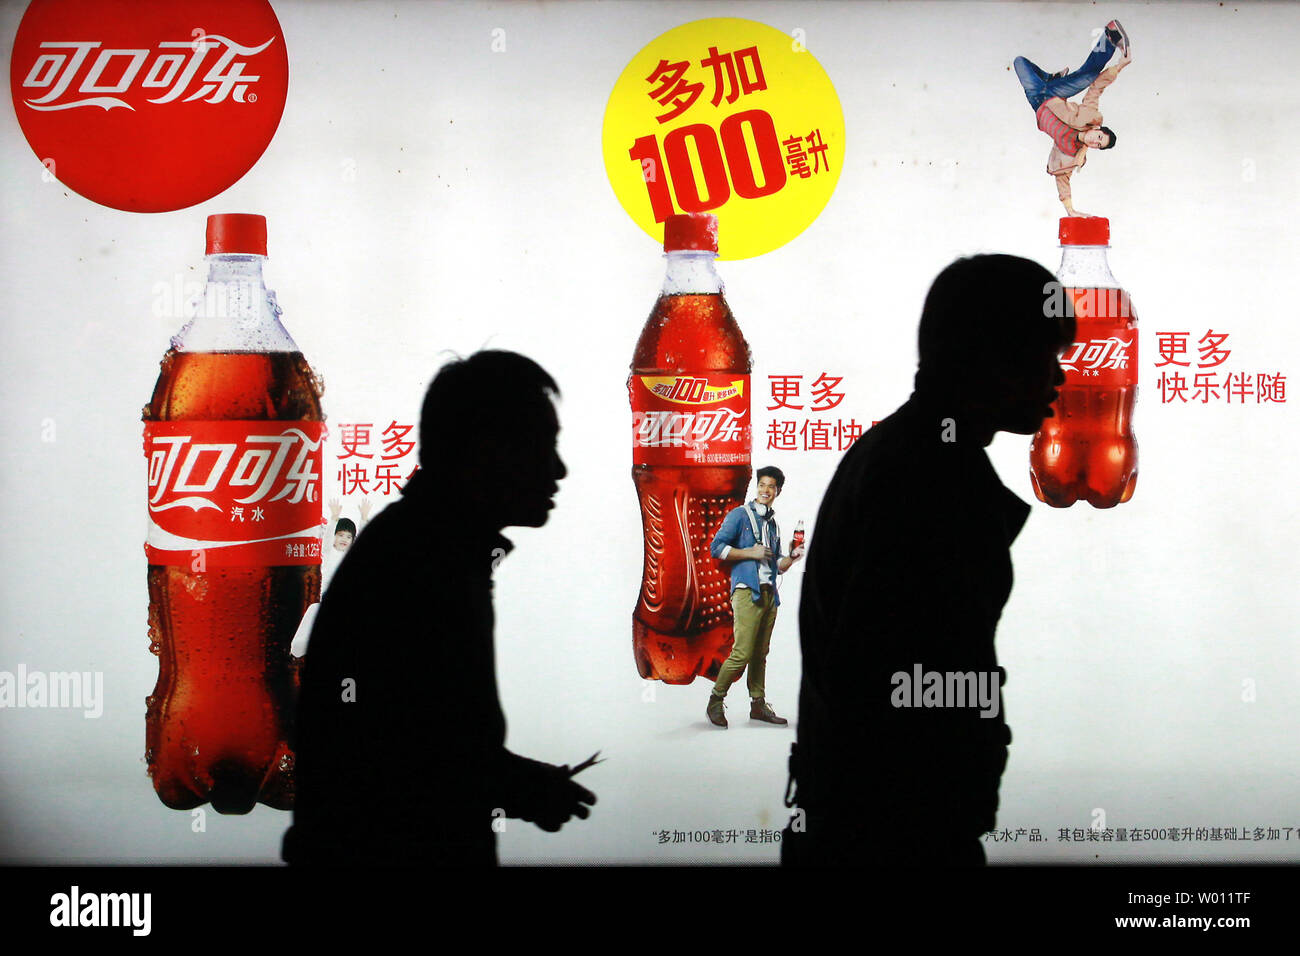 A Chinese walk past a billboard advertising Coca-Cola soft drinks on the streets of Beijing on October 23, 2012.  Last week Coca-Cola said that sales in China grew an anemic 2% compared to 11% last year.  Shares of the world's largest beverage company lost more than 2% this month, mainly due to the slowing of China's economy.      UPI/Stephen Shaver Stock Photo